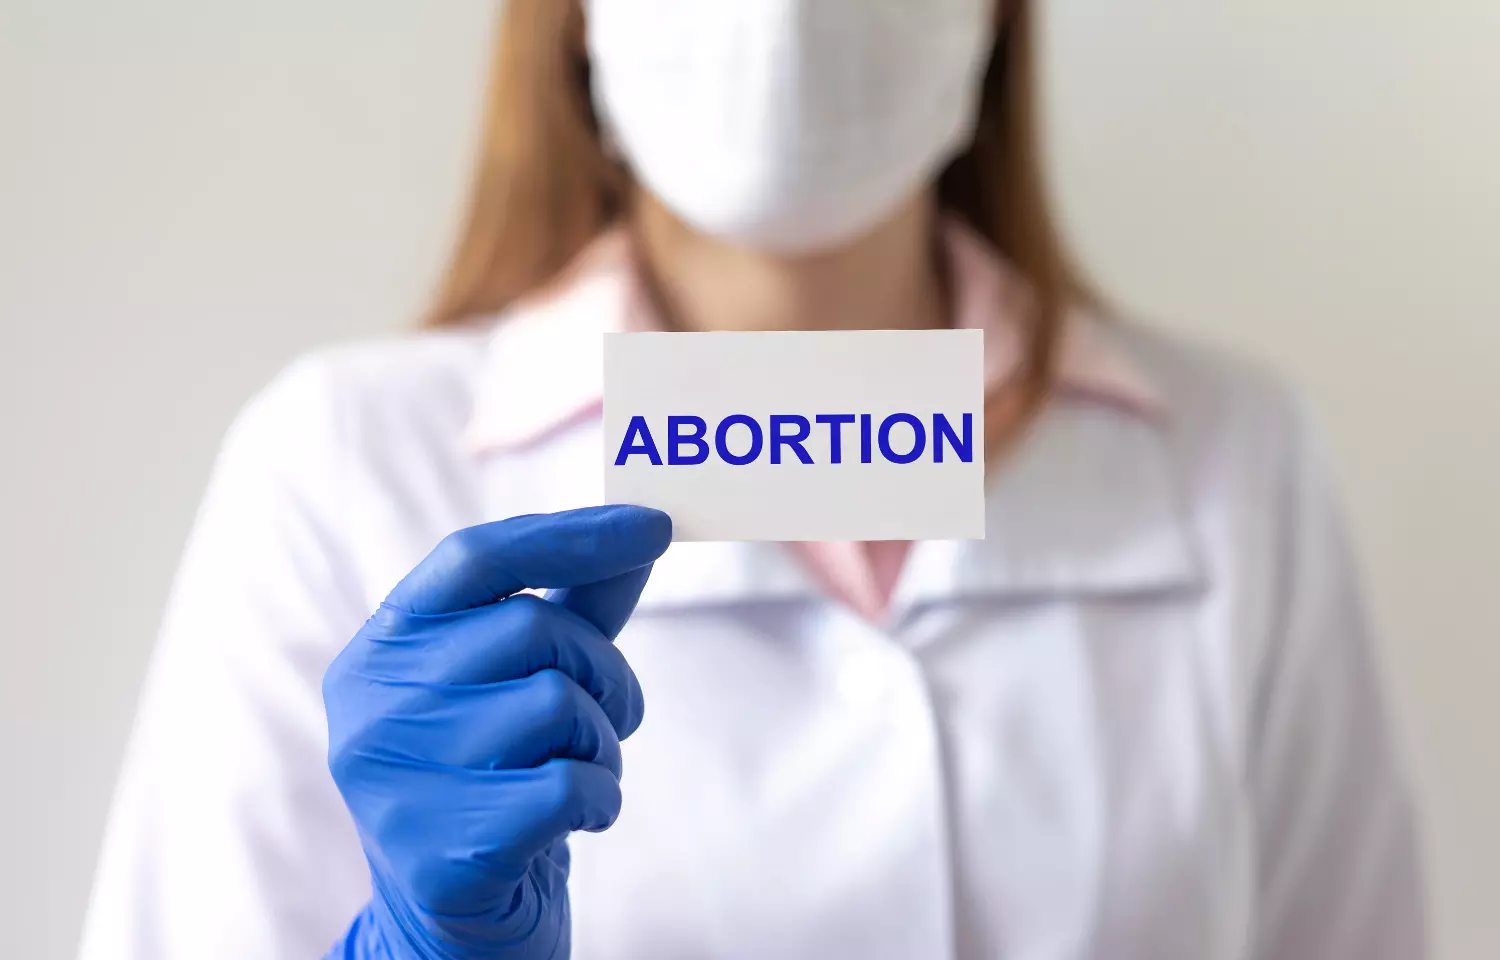 History-based screening for medication abortion safe and effective, reveals JAMA study